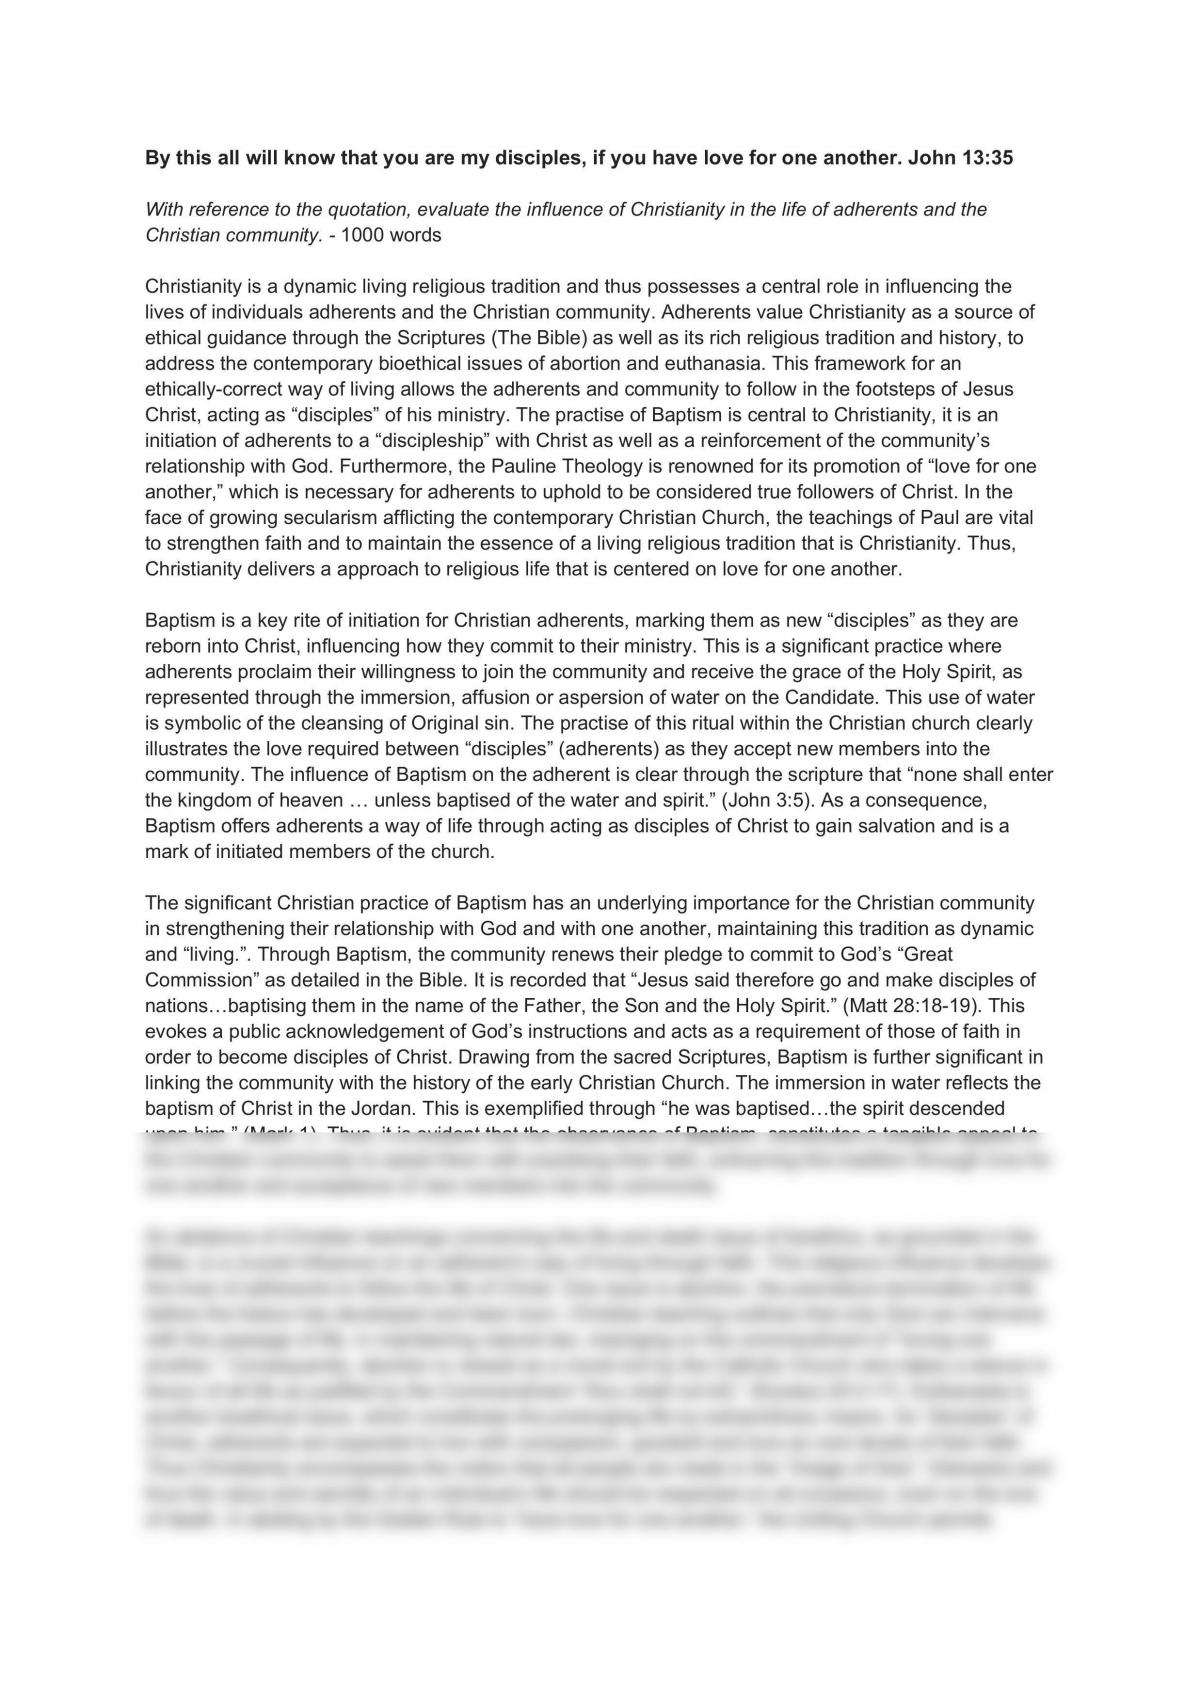 Christianity - Impacts on Community and Adherents - Page 1